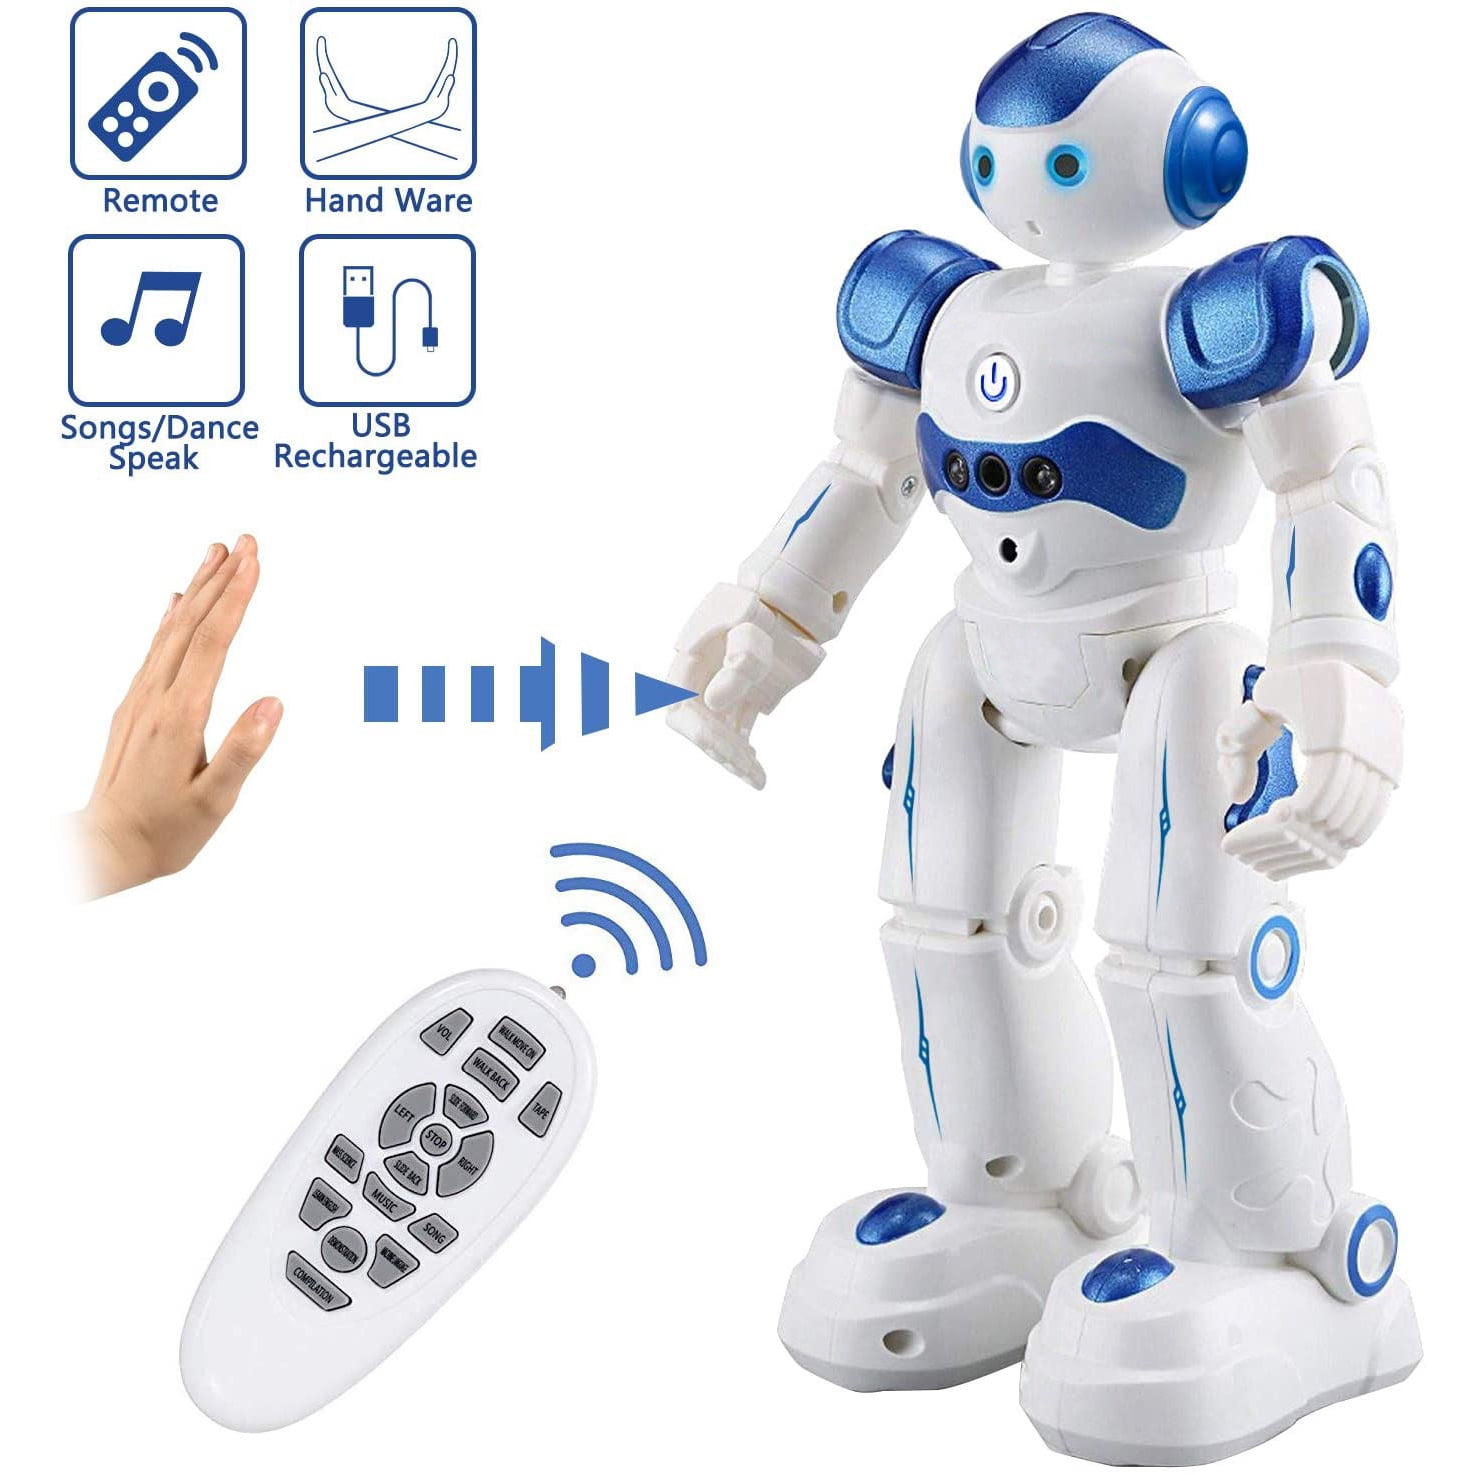 E-More Remote Control Robot Toy for Kids Programmable Intelligent Gesture 